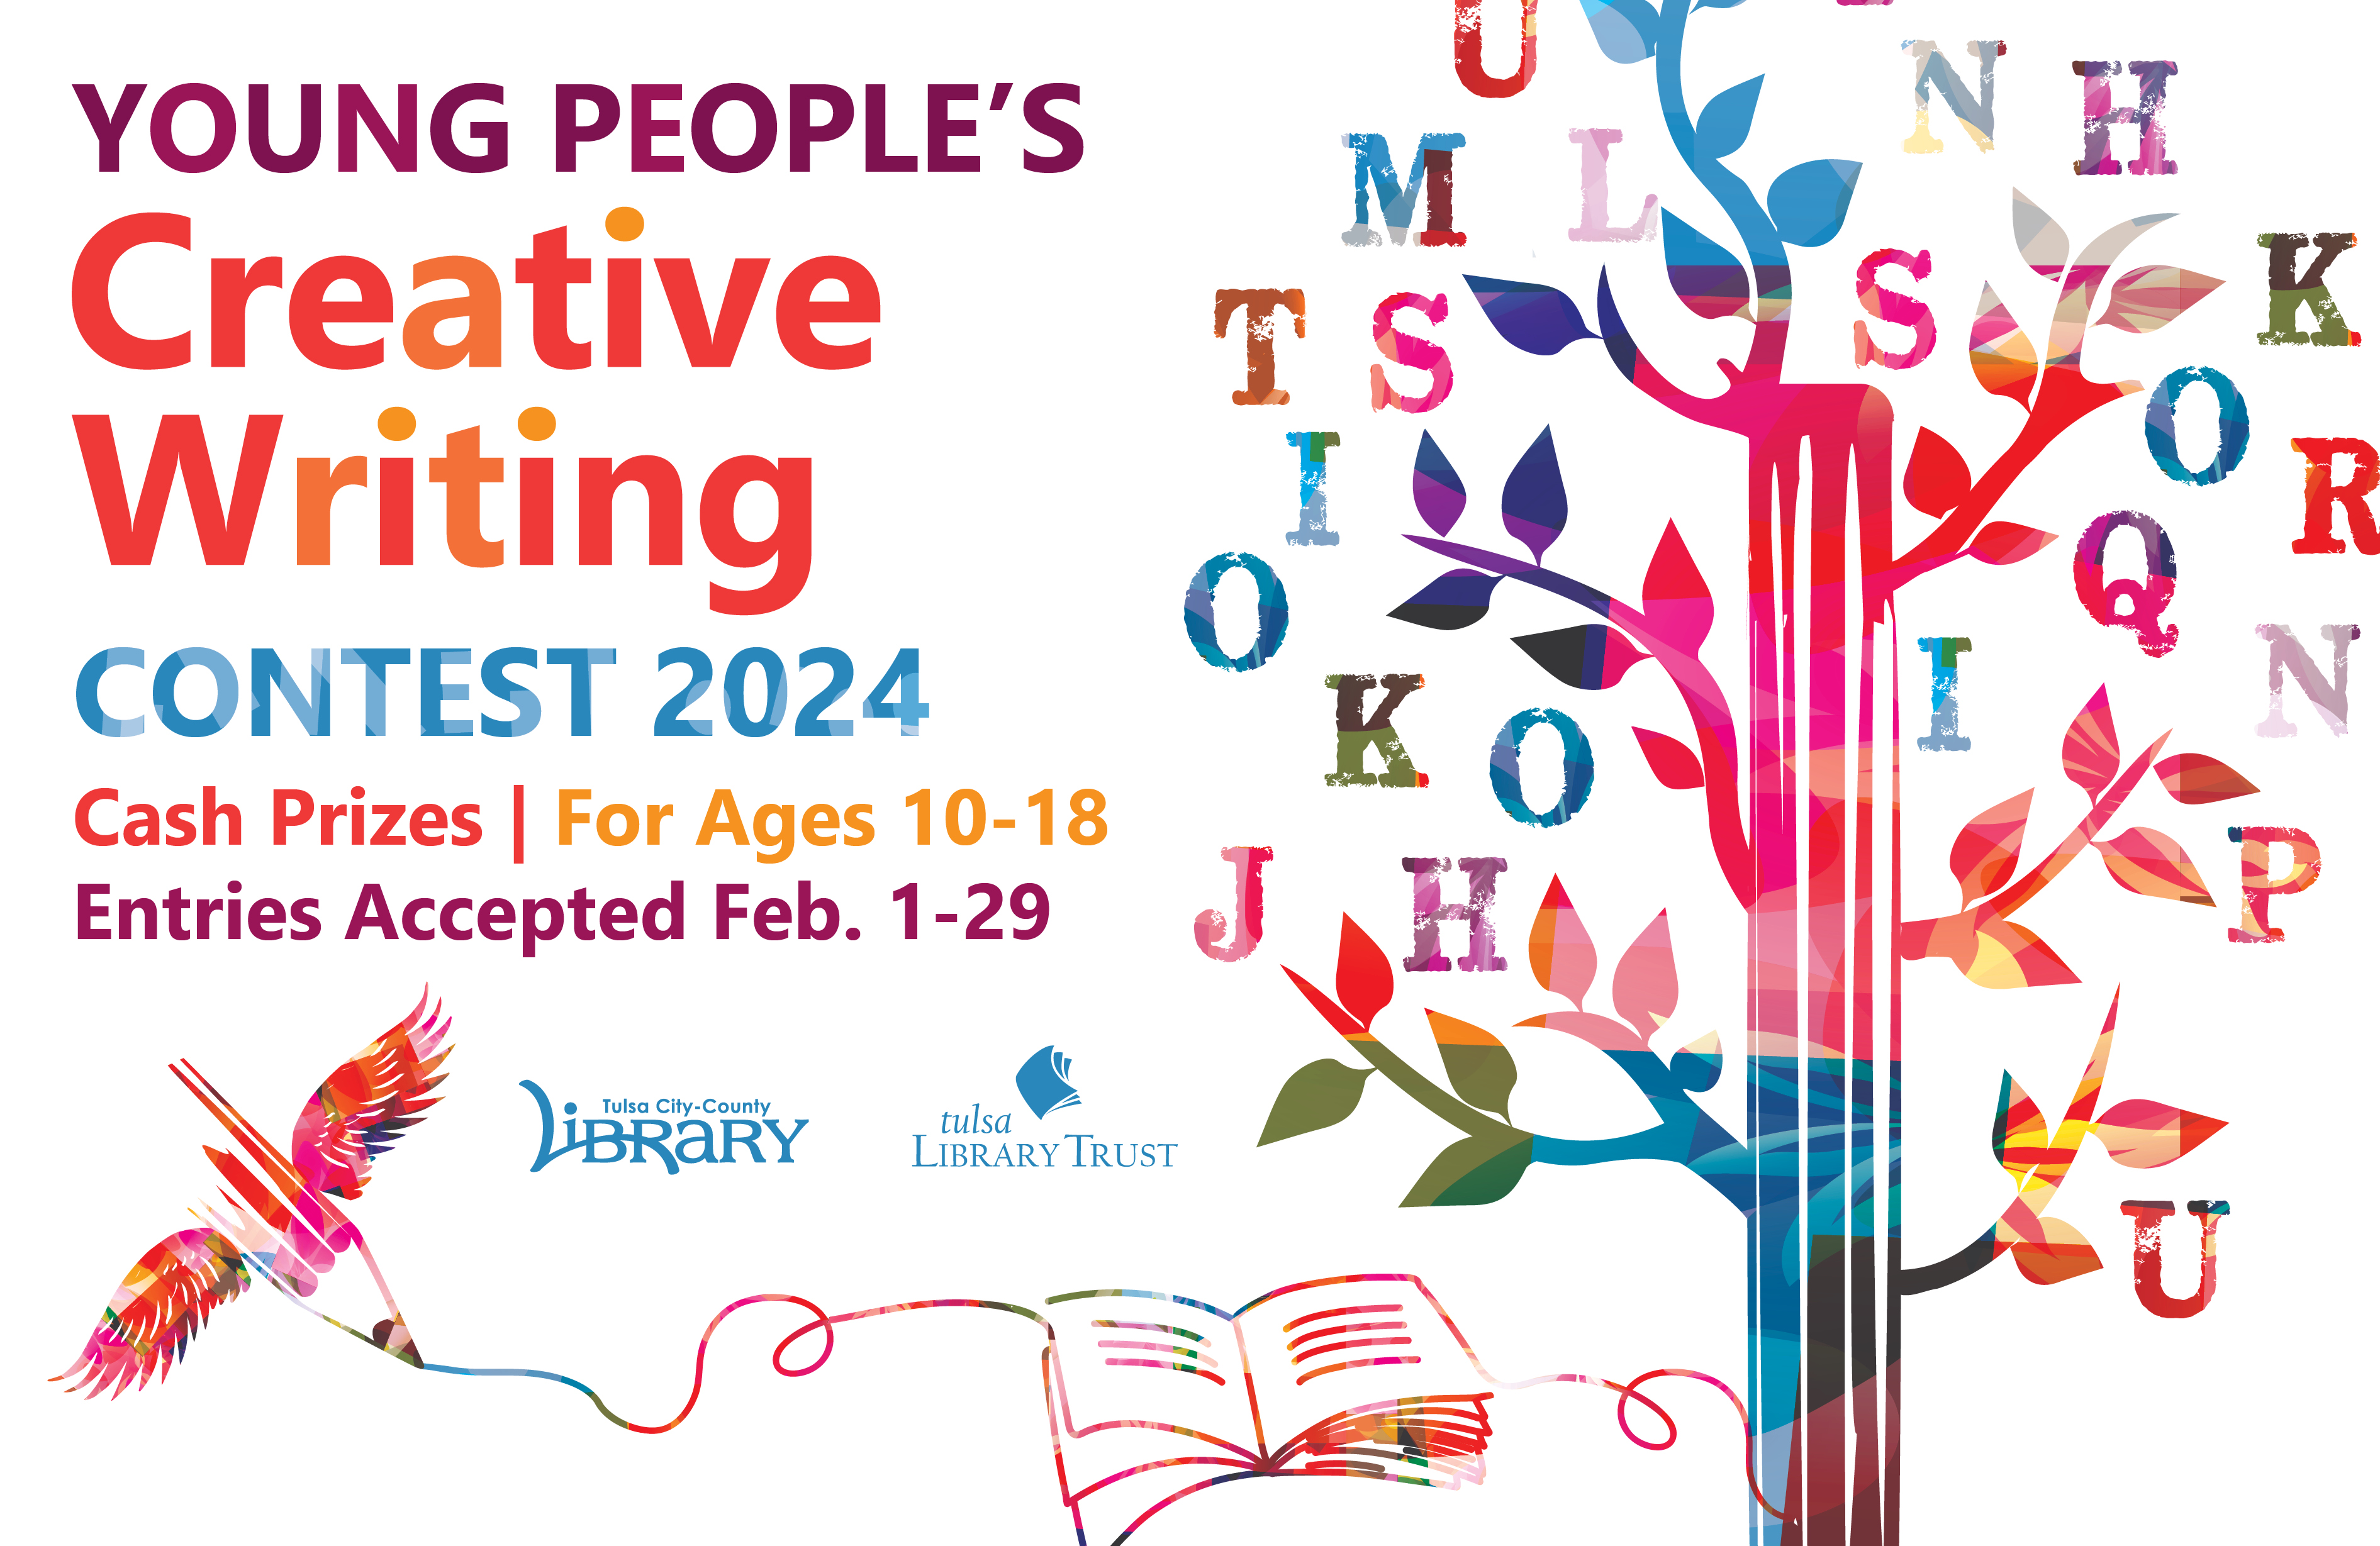 Young People's Creative Writing Contest Banner Image, white with multicolored tree, bird, and book